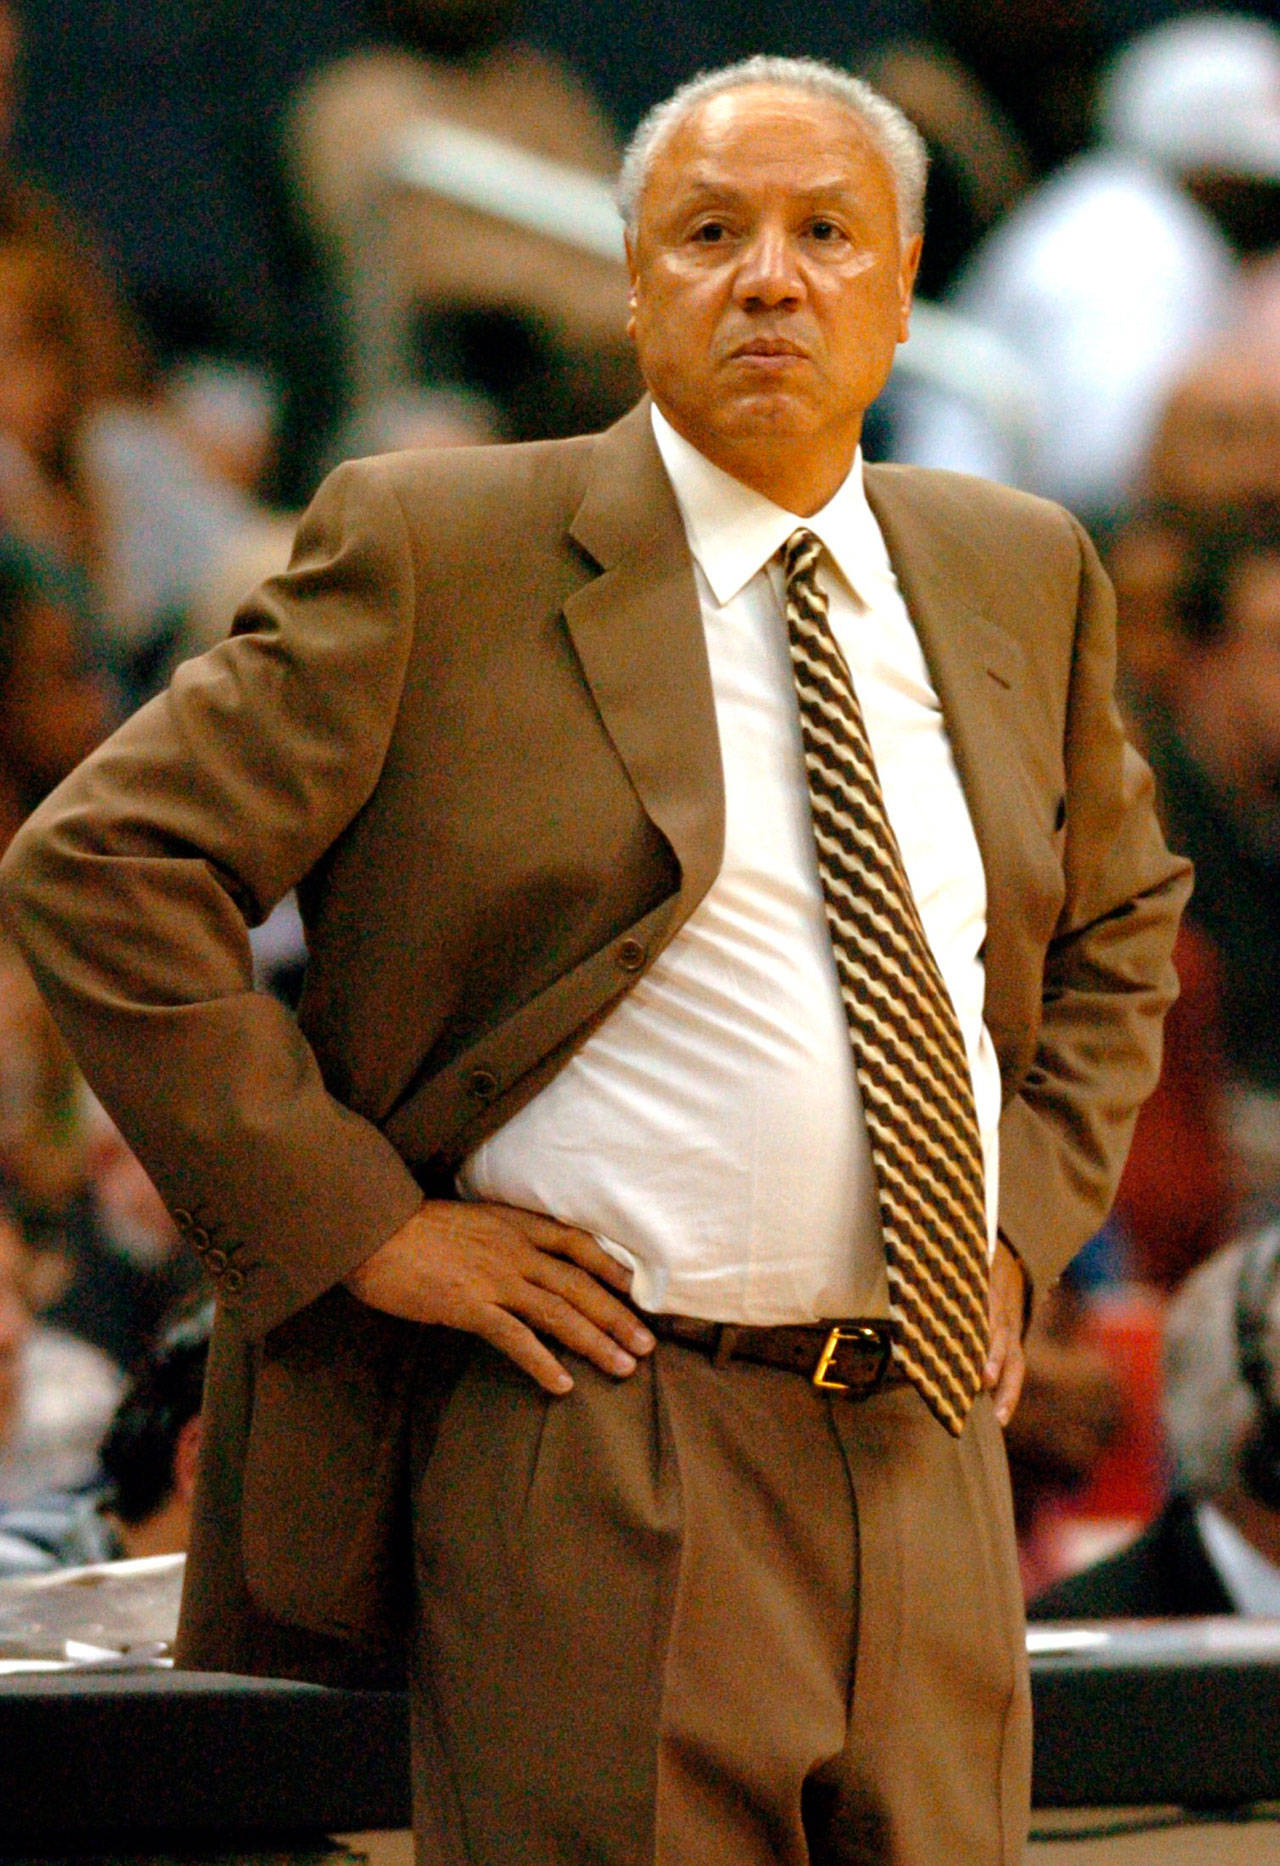 Seattle Supersonics and NBA legend Lenny Wilkins, seen here coaching for New York in a 2004 file photo, announced he is stepping away from his foundation after 40 years, citing he wants to spend more time with his family. (GEORGE BRIDGES/KRT)